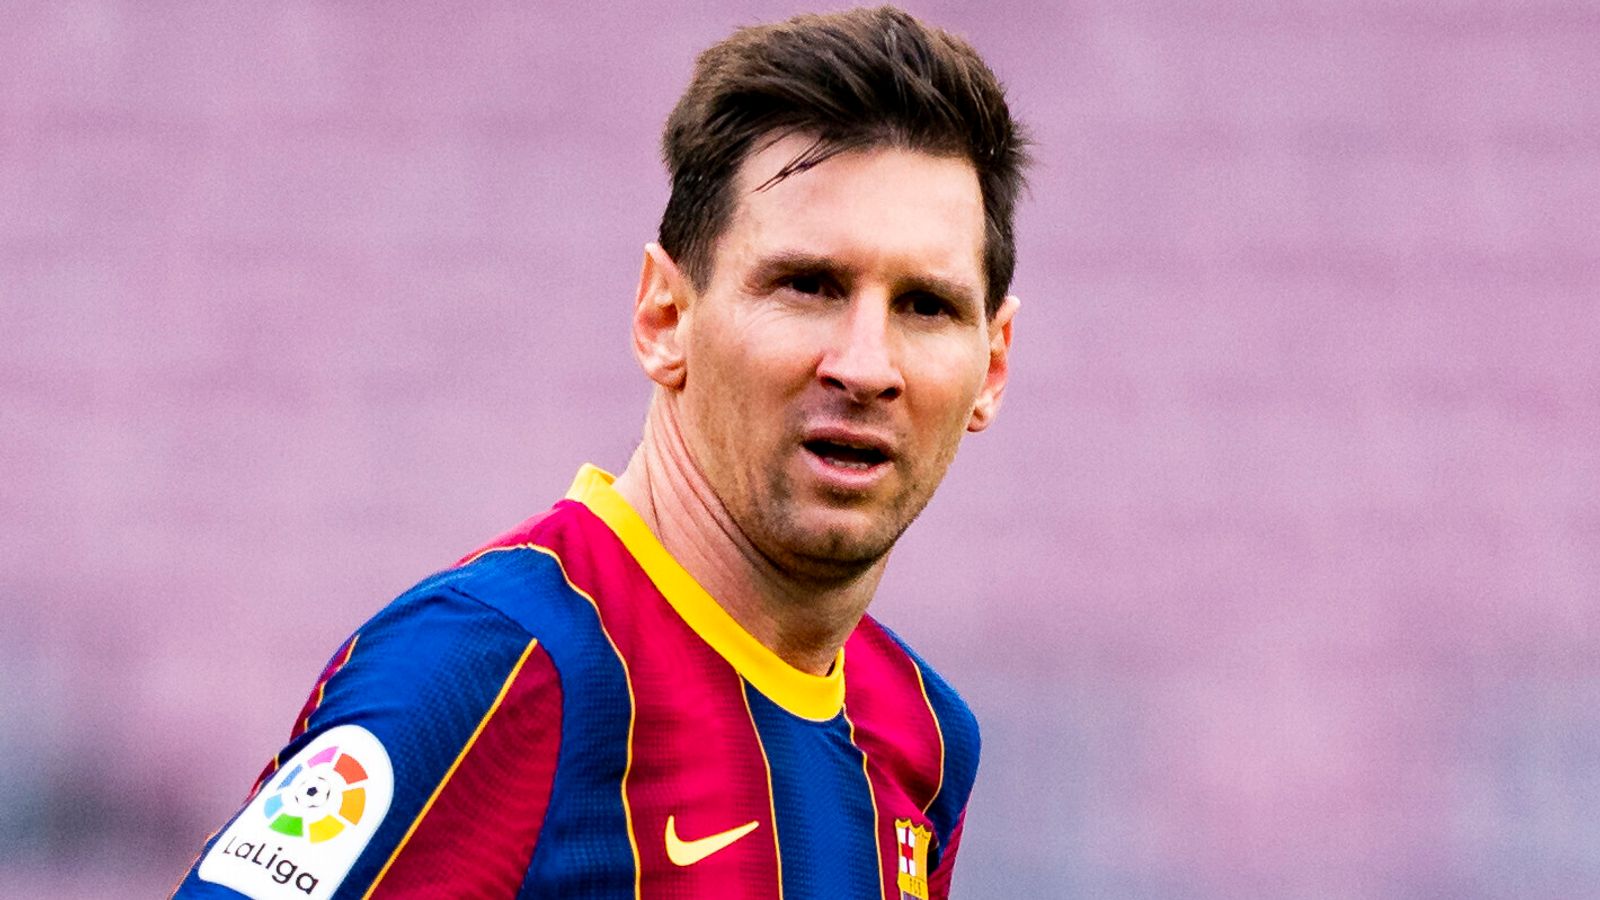 Watch: Anand Mahindra Shares Incredible Video Of Barber Portraying Messi's  Face In Haircut